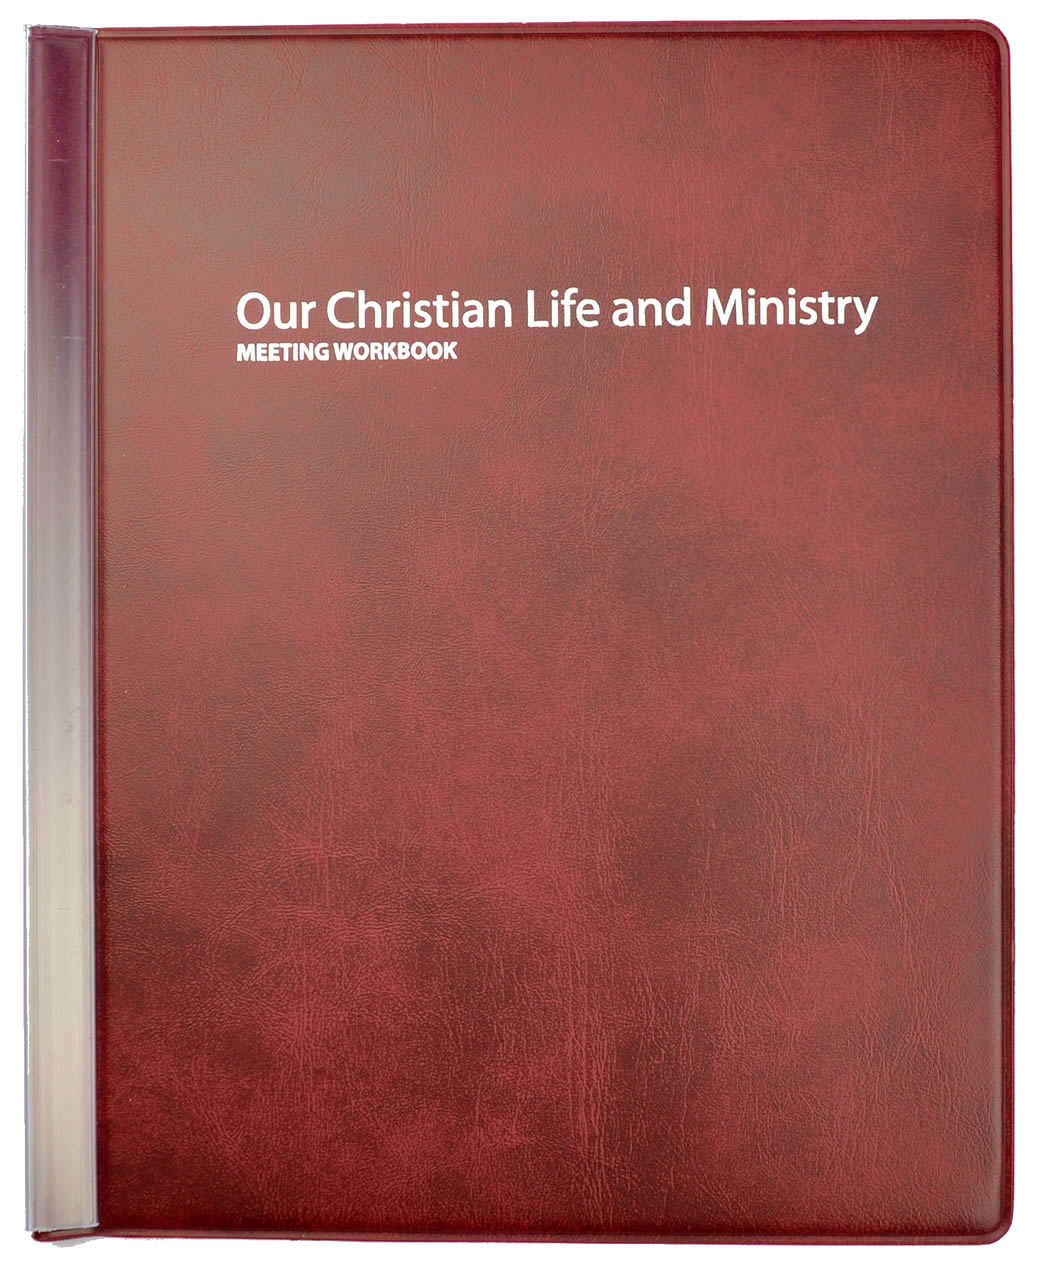 Our Christian Life and Ministry Meeting Workbook Folder - WINE  - WINE